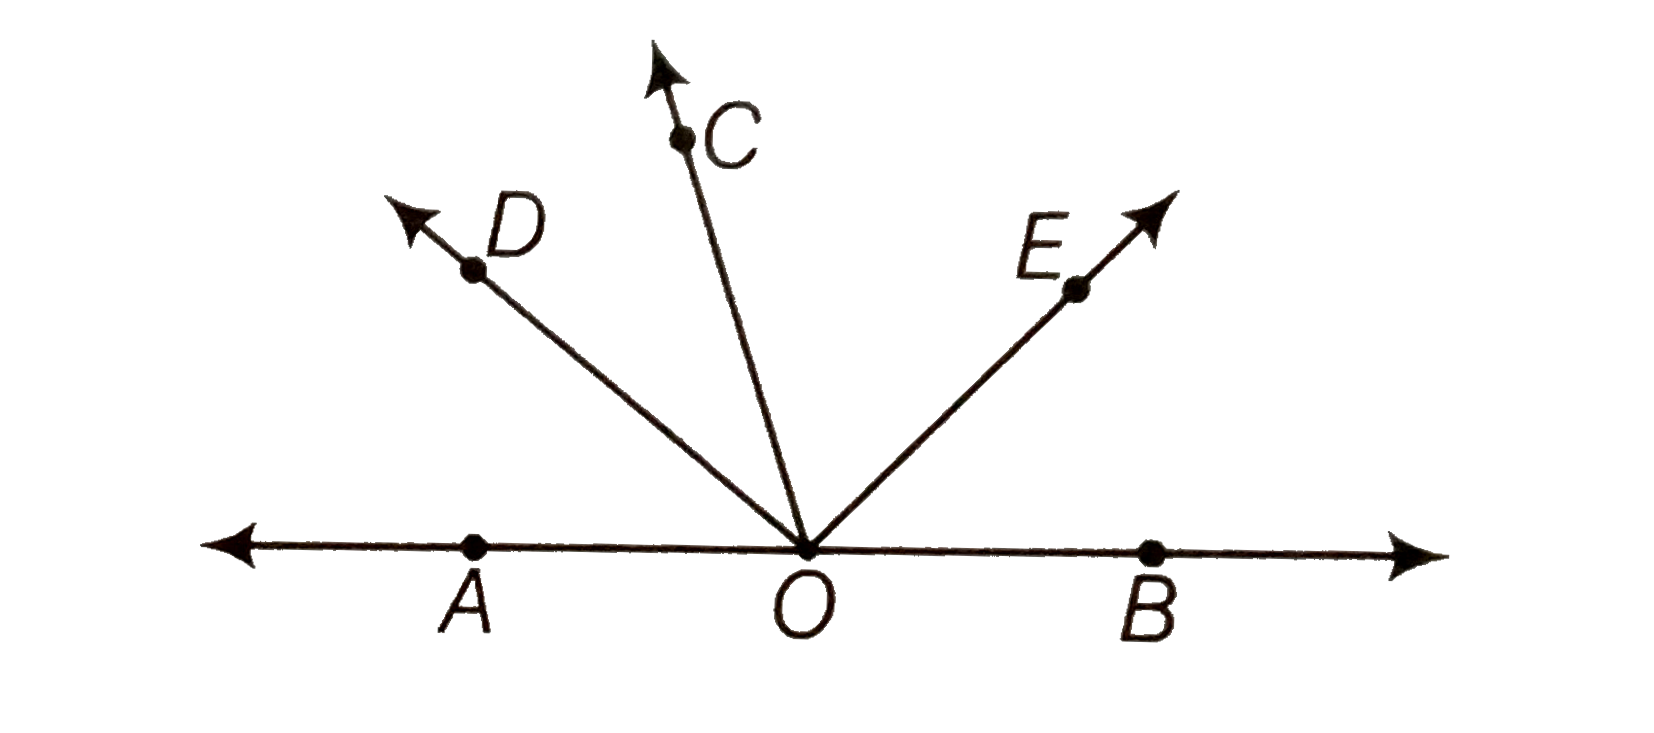 In the figure, OD is the bisector of /AOC, OE is the bisector of /BOC and OD bot OE. Show that the points A, O and B are collinear.